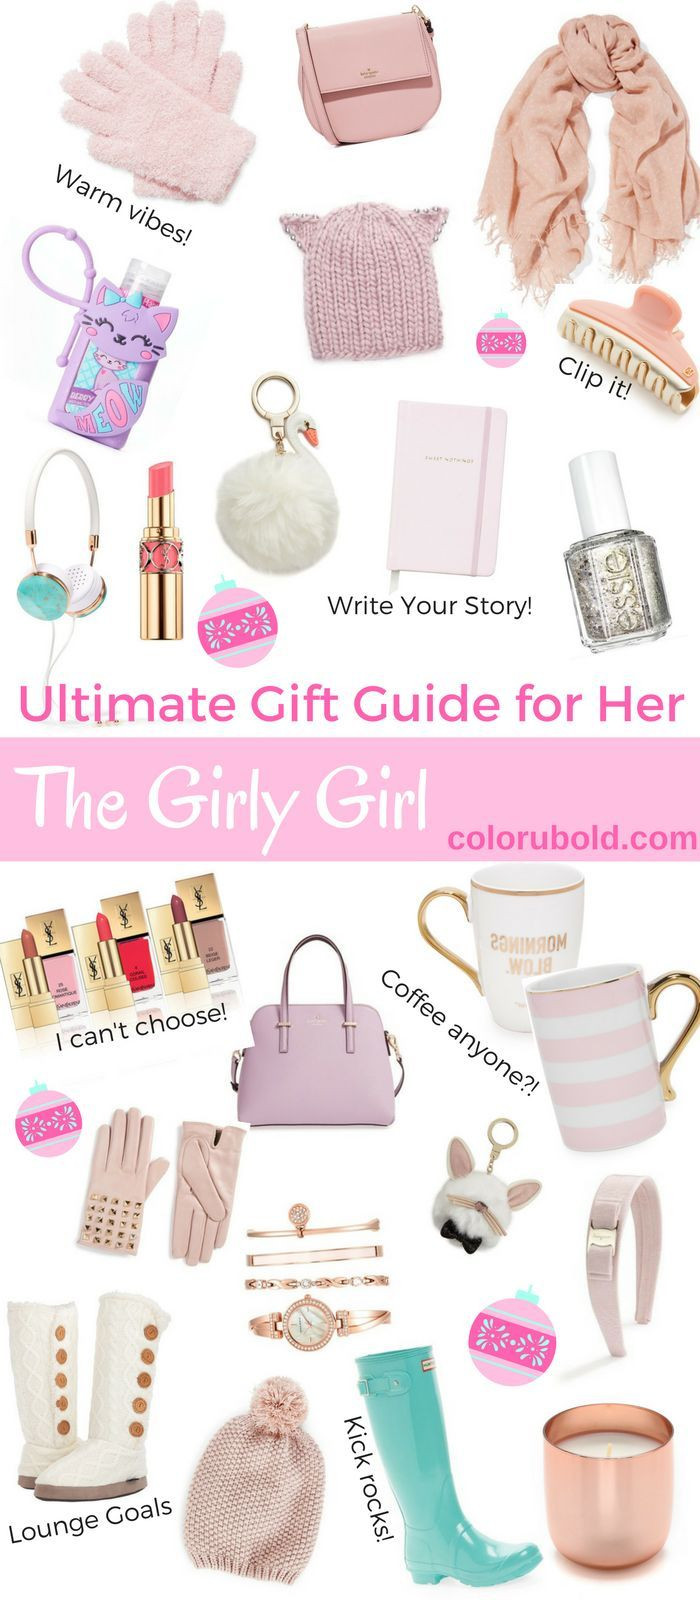 Gift For Girls Ideas
 The Ultimate Gift Guide for the Girly Girl